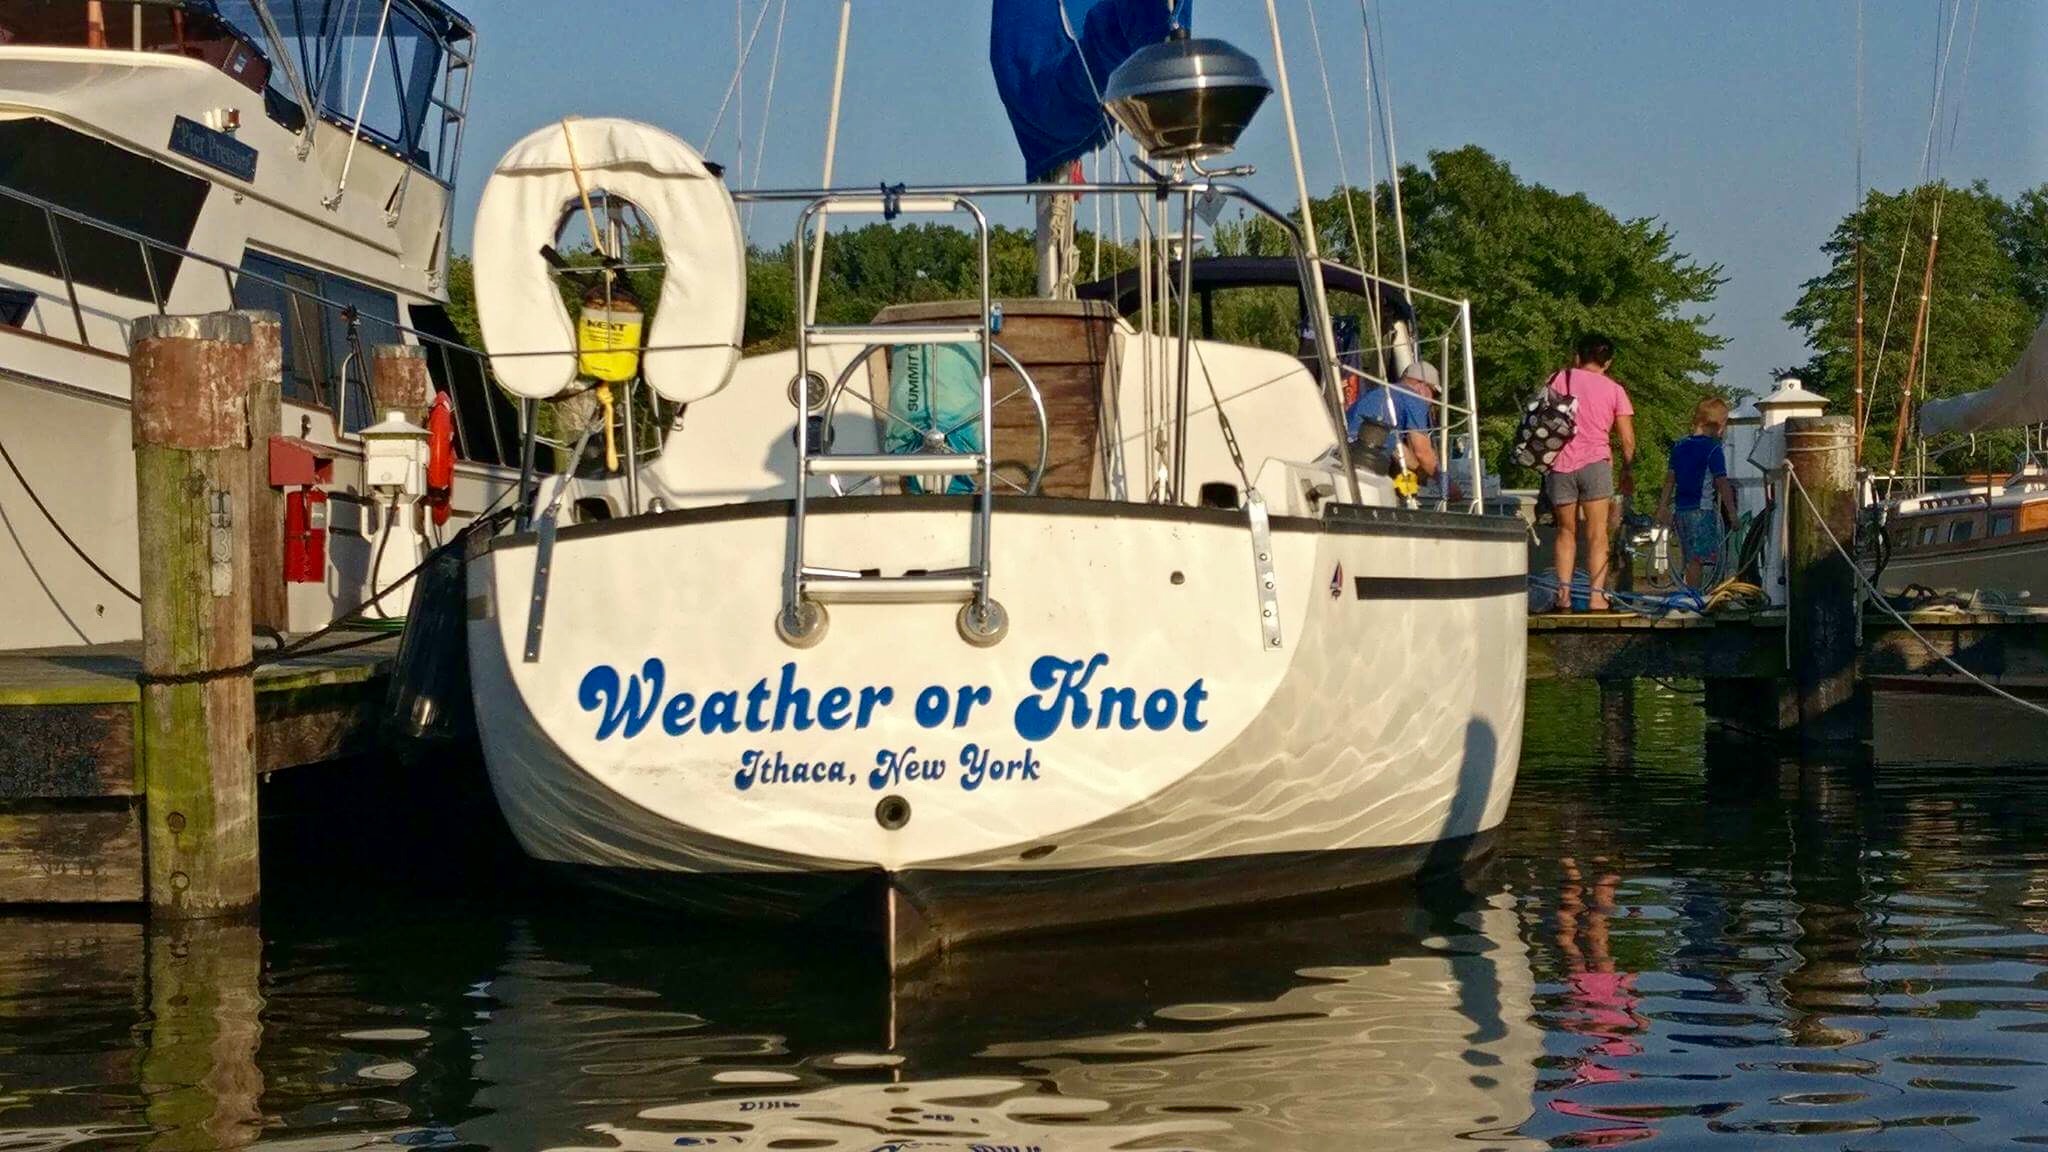 https://forums.sailboatowners.com/attachments/img_0601-jpg.139447/